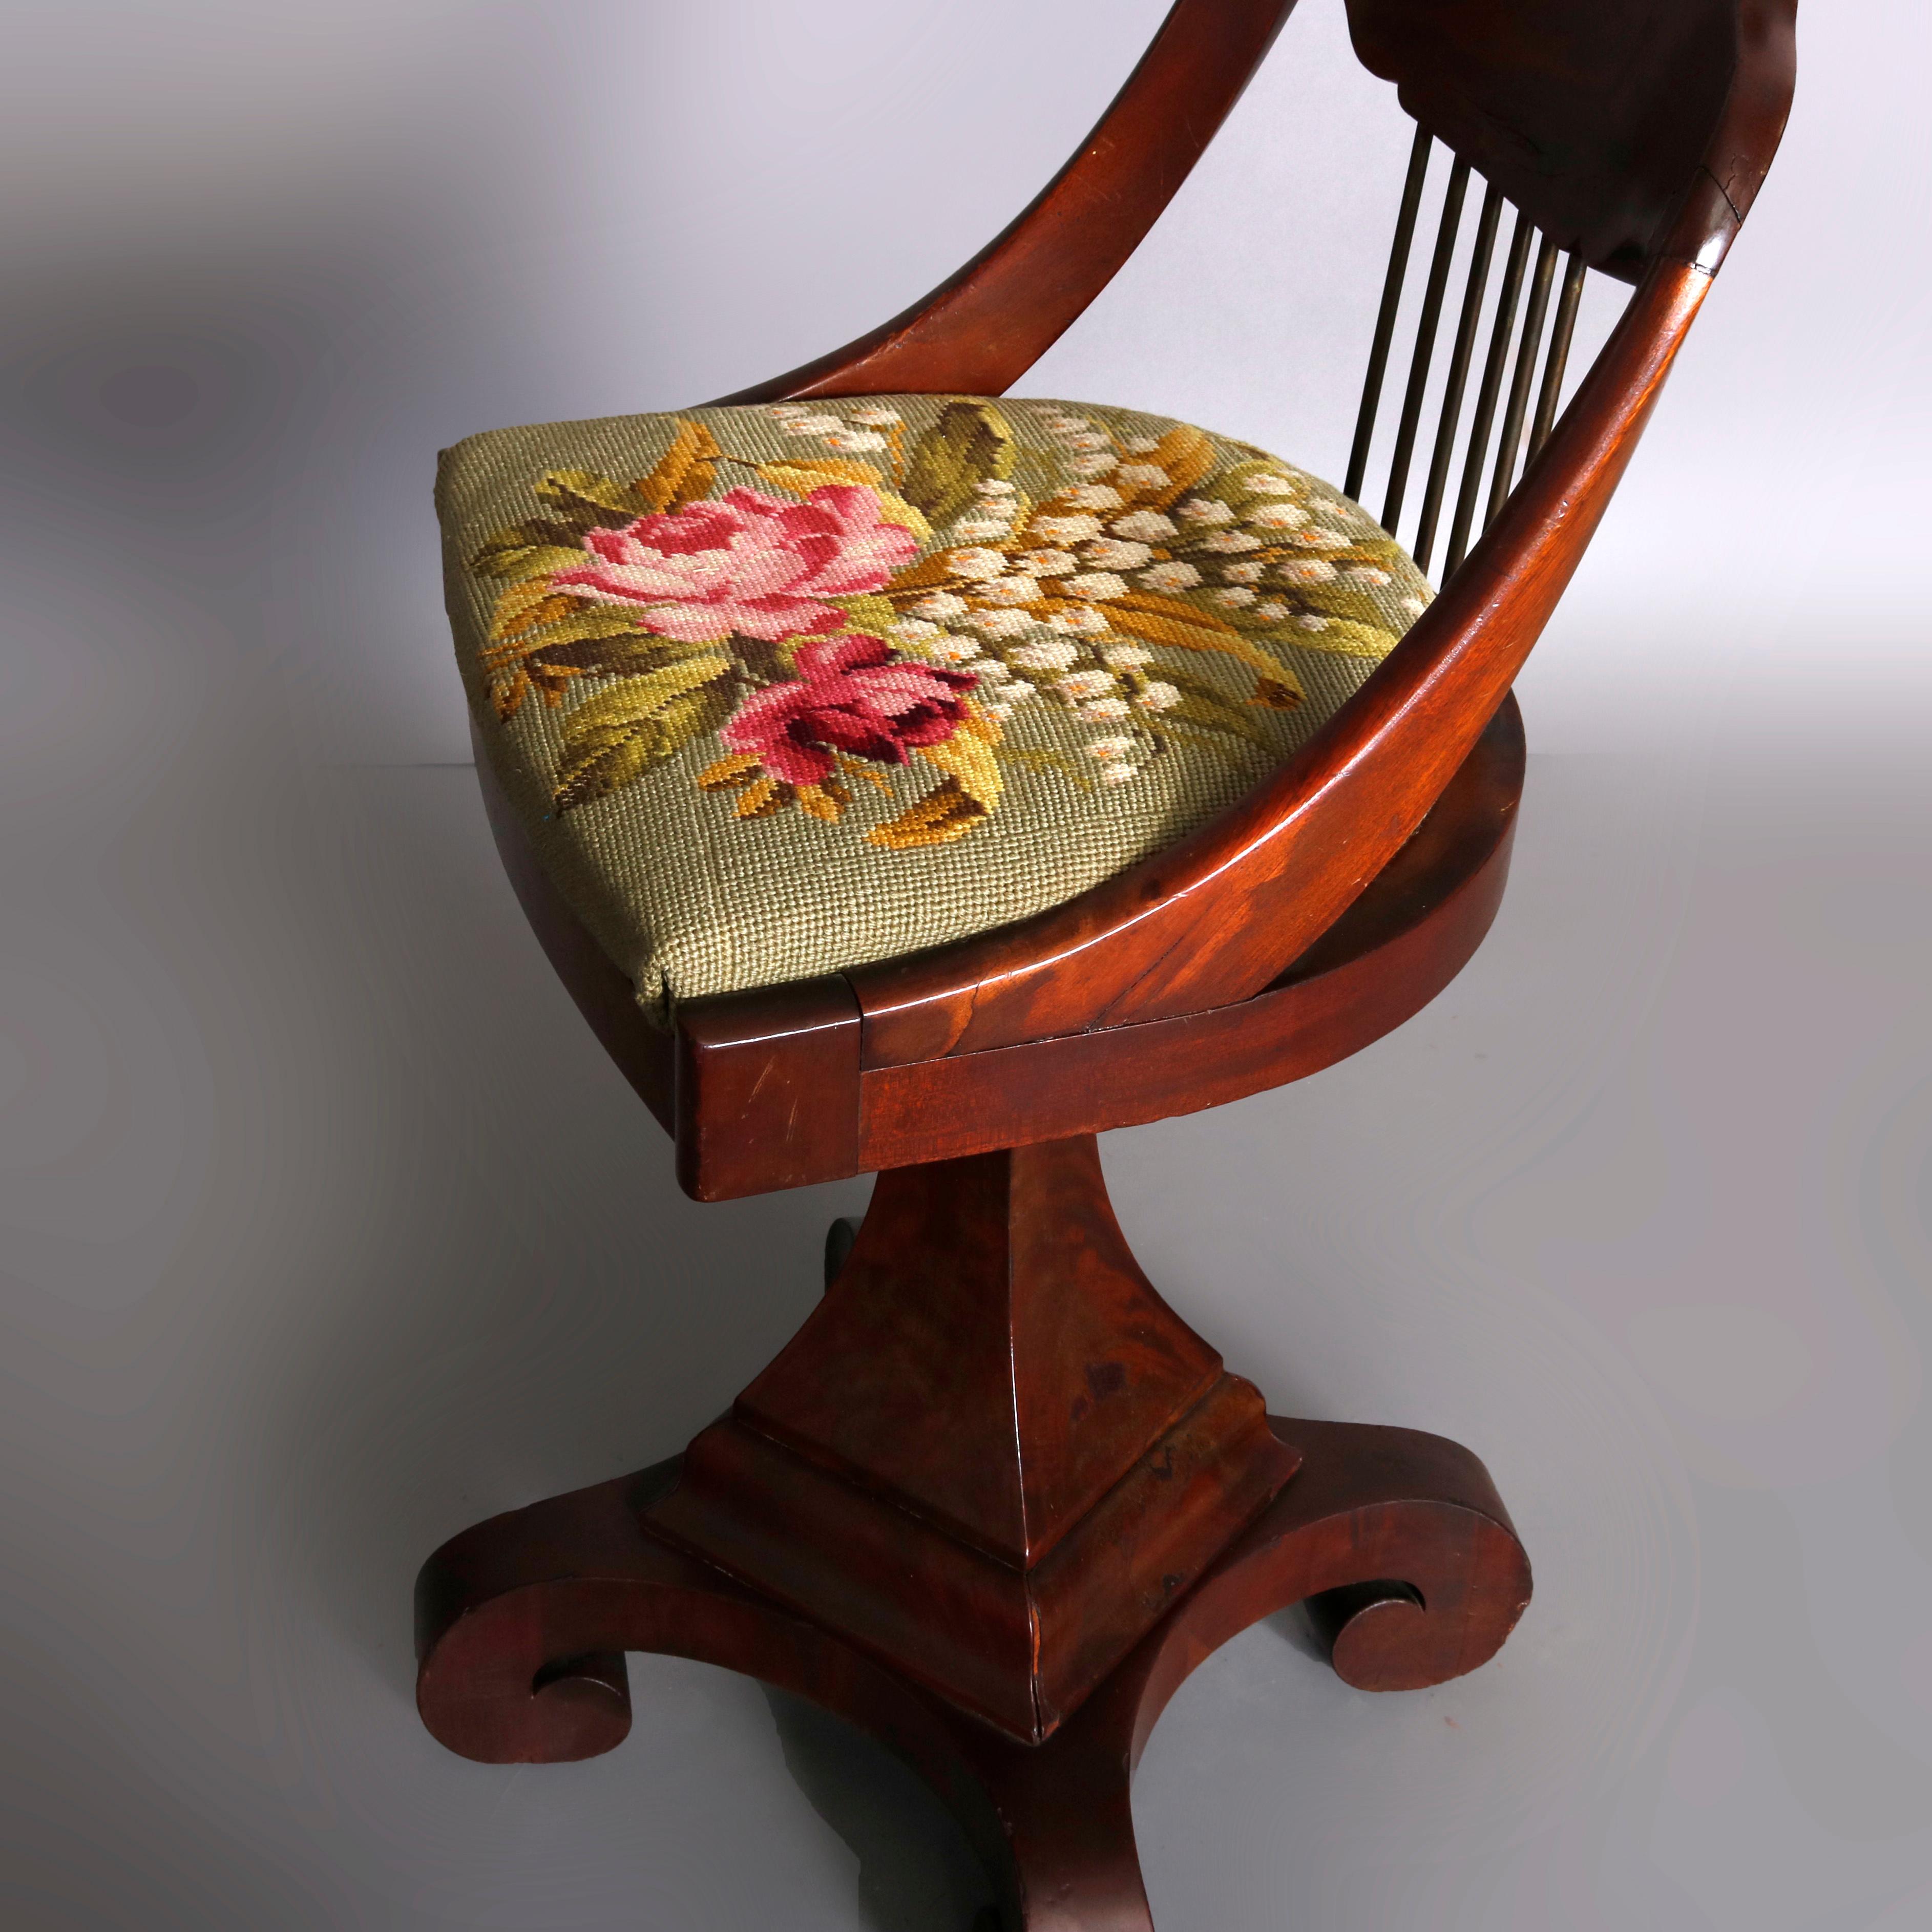 A classical American Empire piano chair offers flame mahogany construction with shaped spindle back over floral needlepoint upholstered seat surmounting flared and faceted column raised on scroll form feet, circa 1840

***DELIVERY NOTICE – Due to